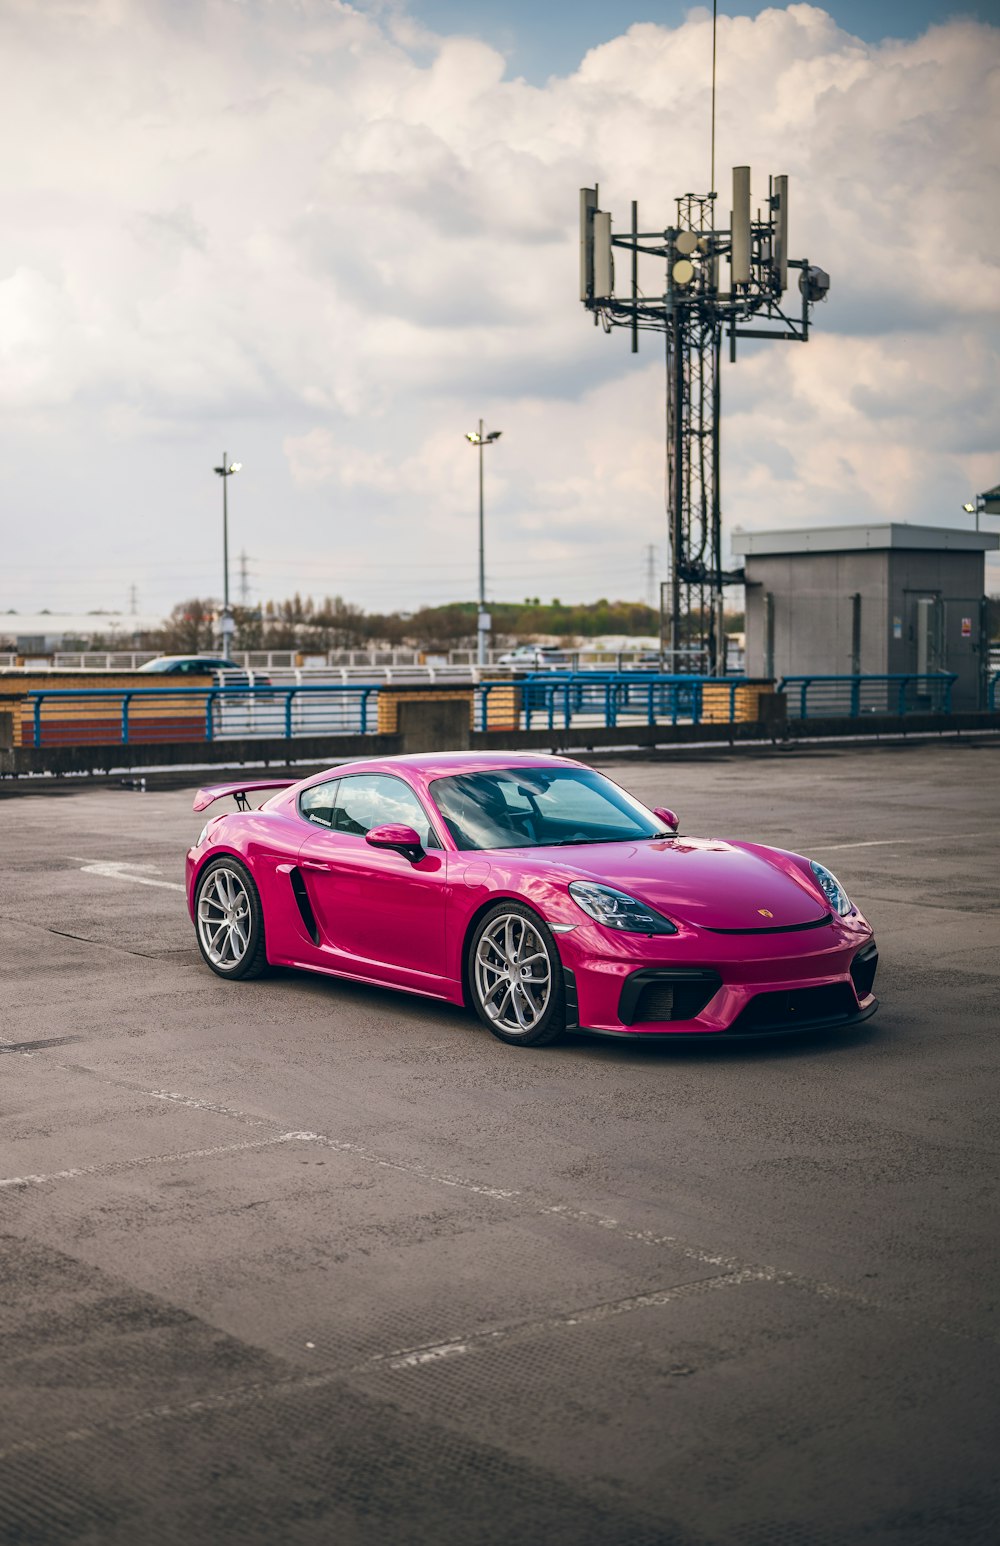 a pink sports car parked in a parking lot